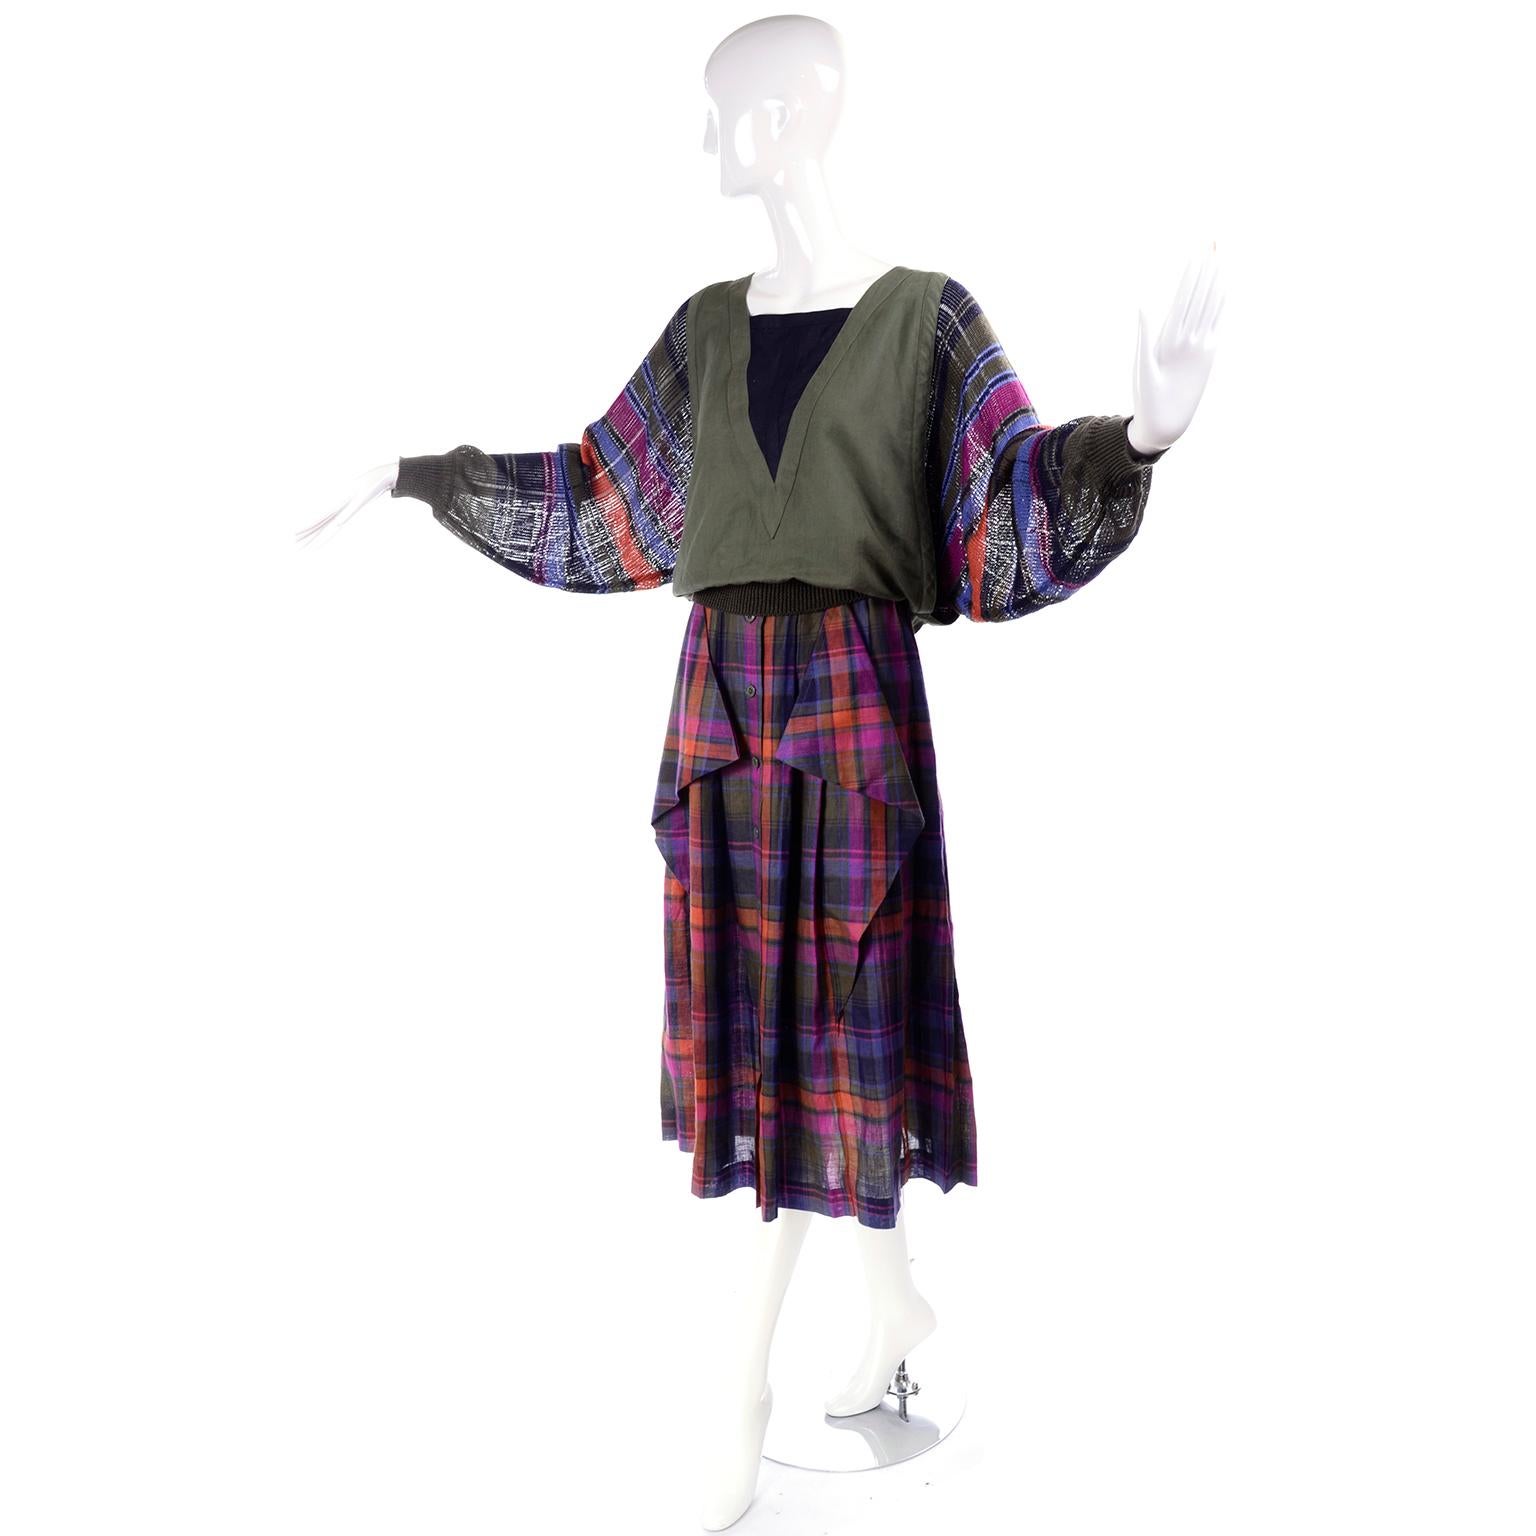 This is a beautiful ensemble from the 1980's designed by Margaretha Ley for Escada. The outfit has a pleated midi length skirt that buttons down the front. It is made of linen in an olive green, pink, blue and orange plaid print. It has two